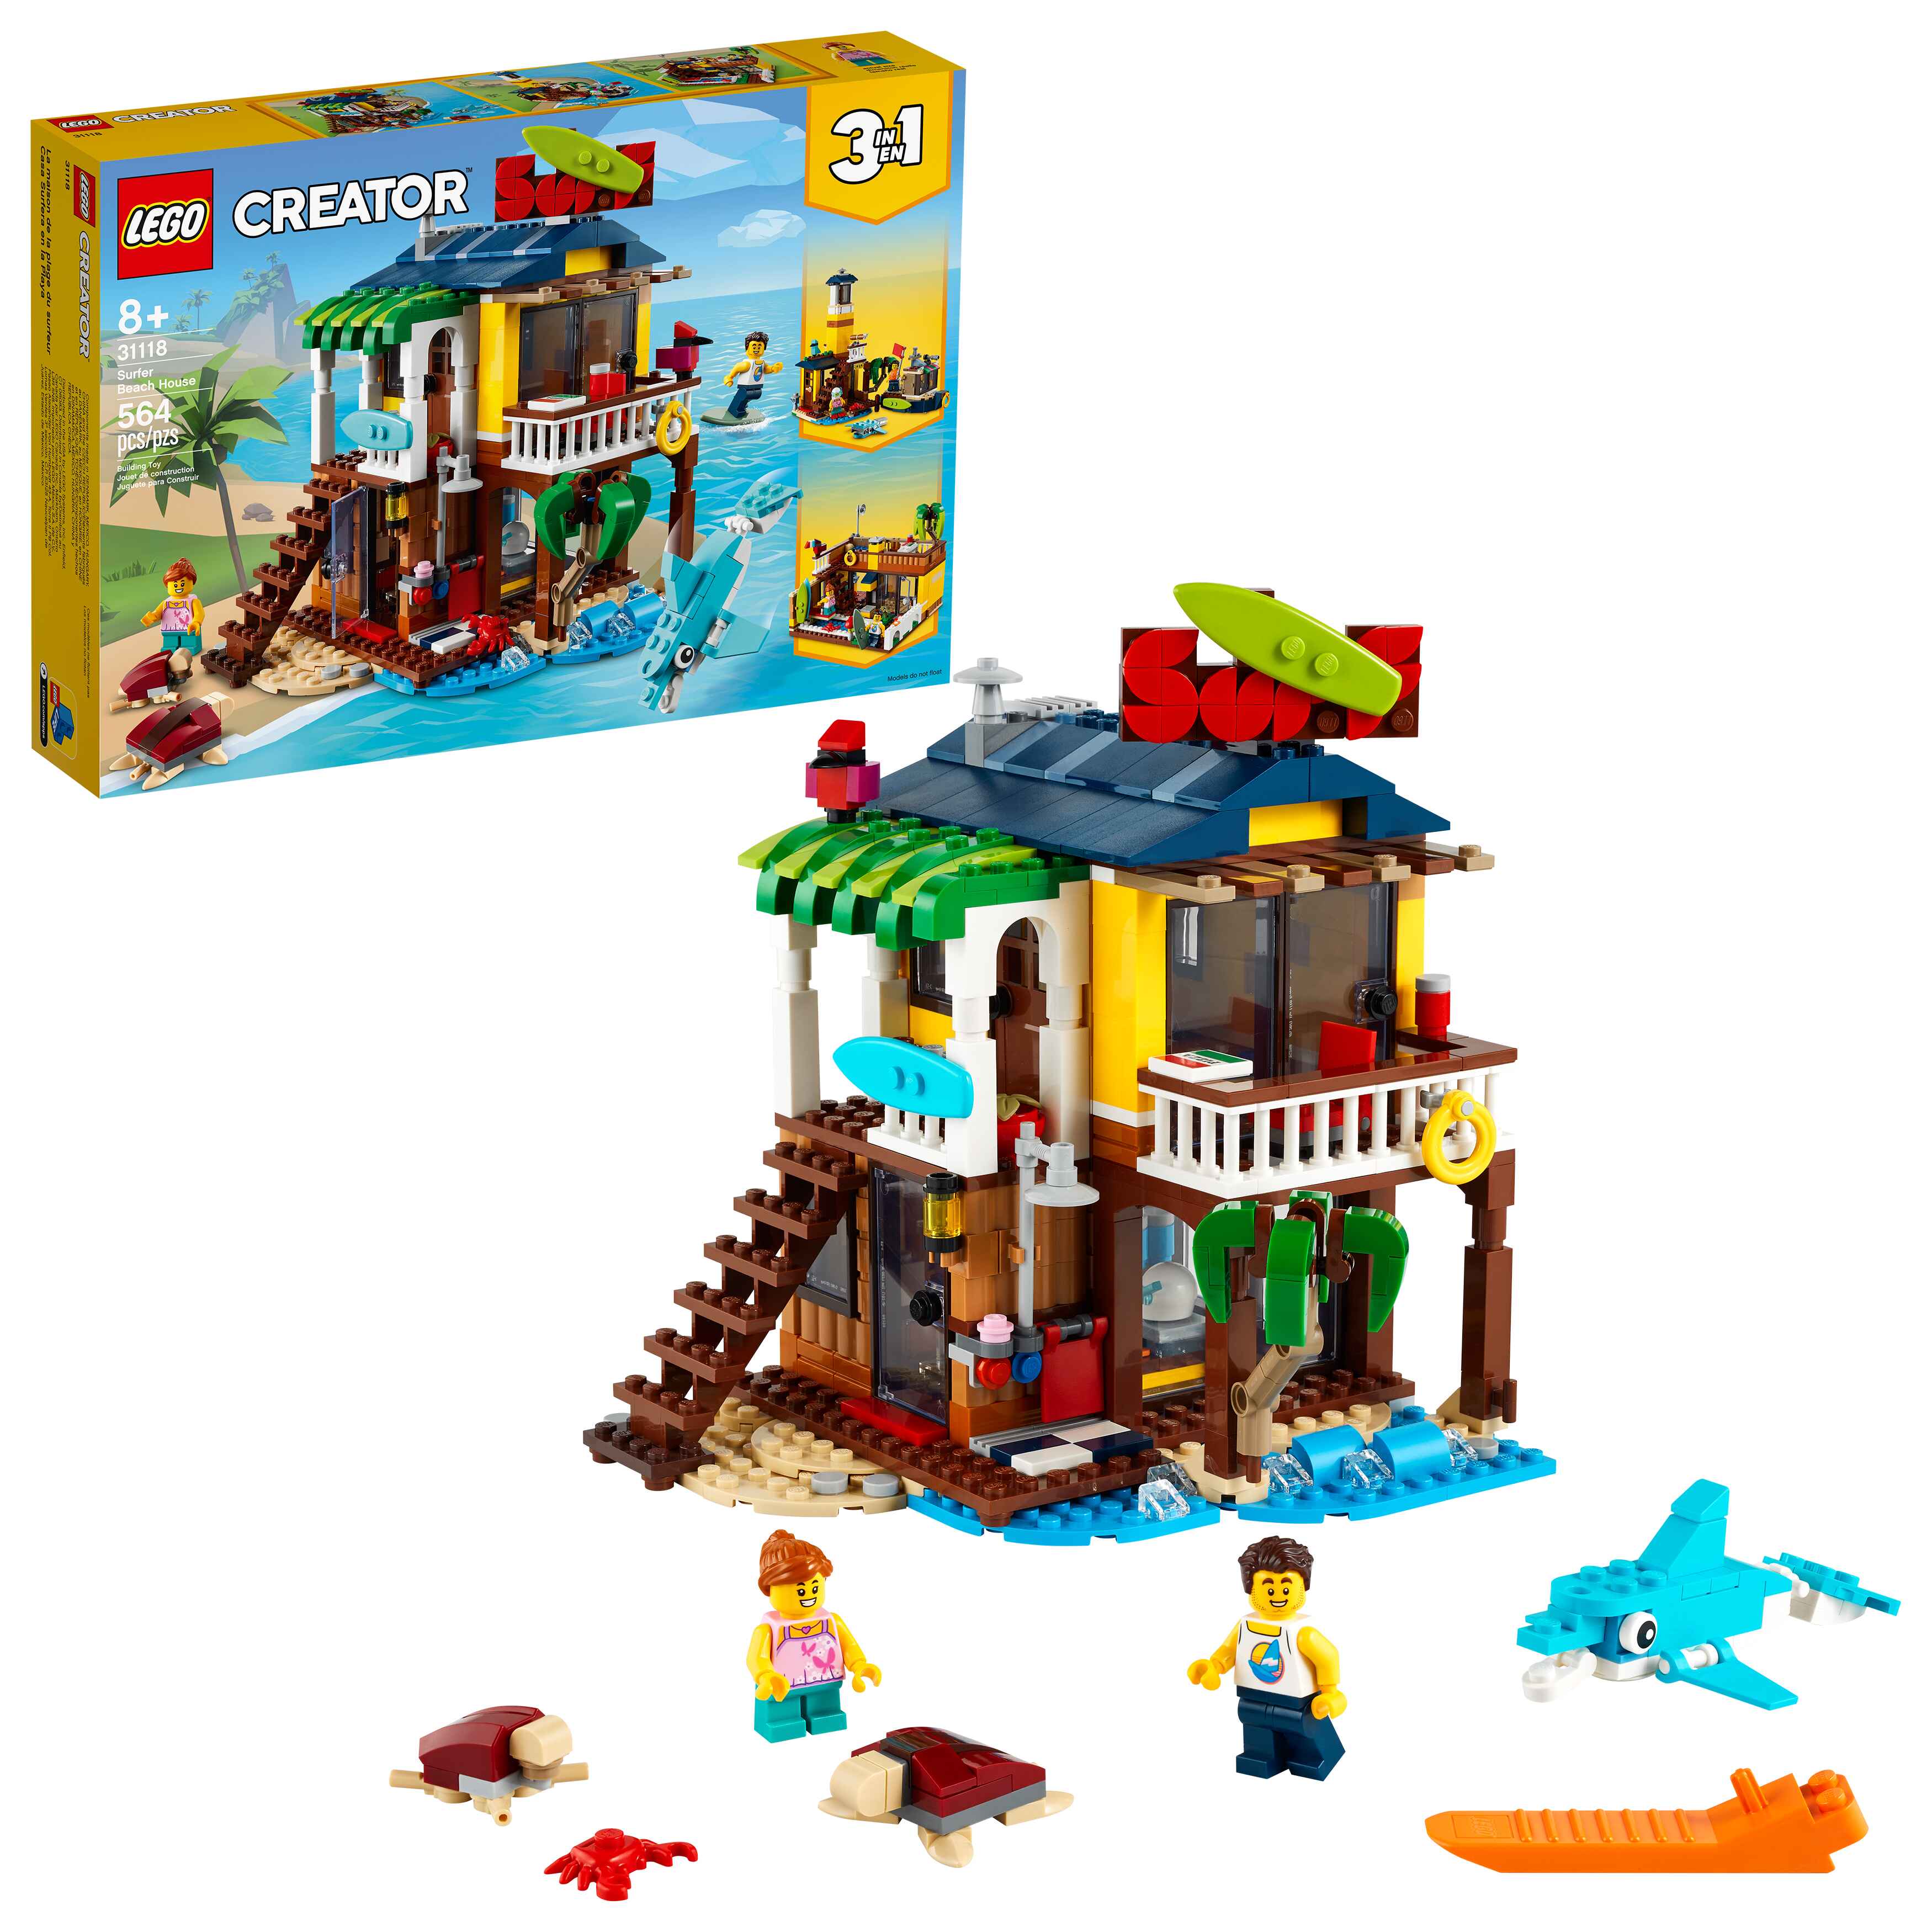 LEGO® Creator 3in1 Surfer Beach House 31118 Building Kit (564 Pieces)